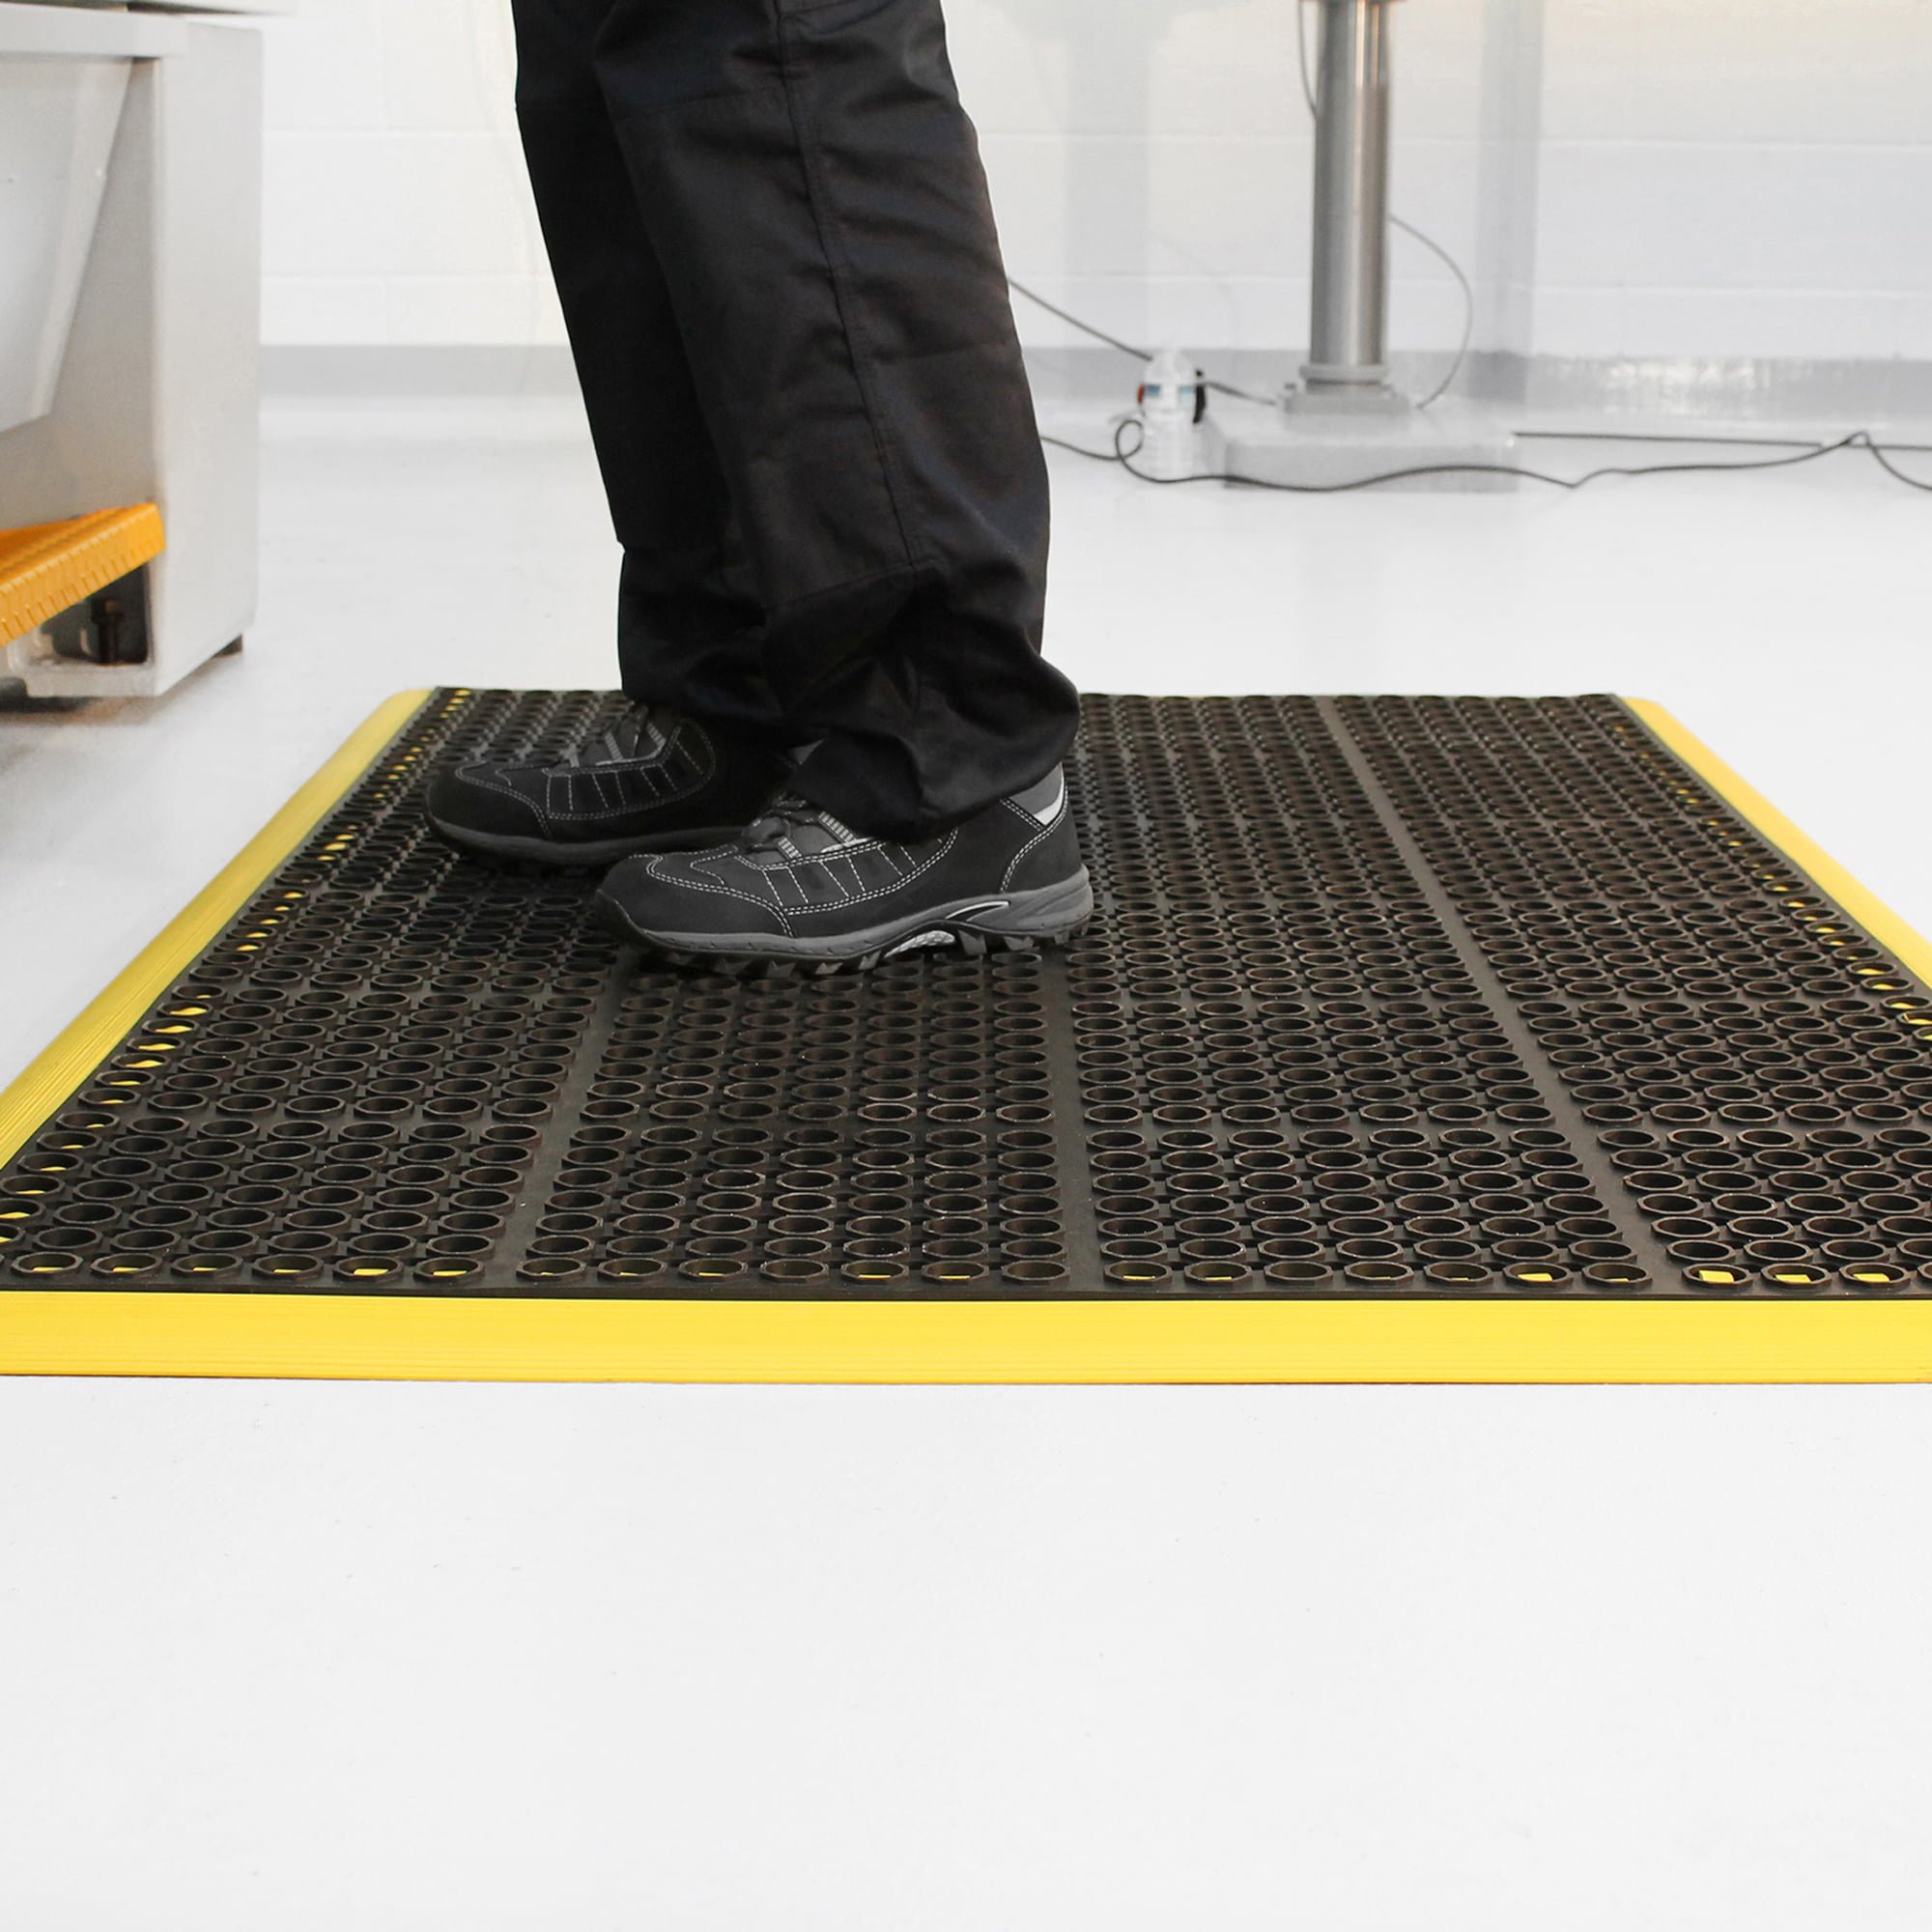 Do Your Part and Install Industrial Anti-Fatigue Mats for Your Workers